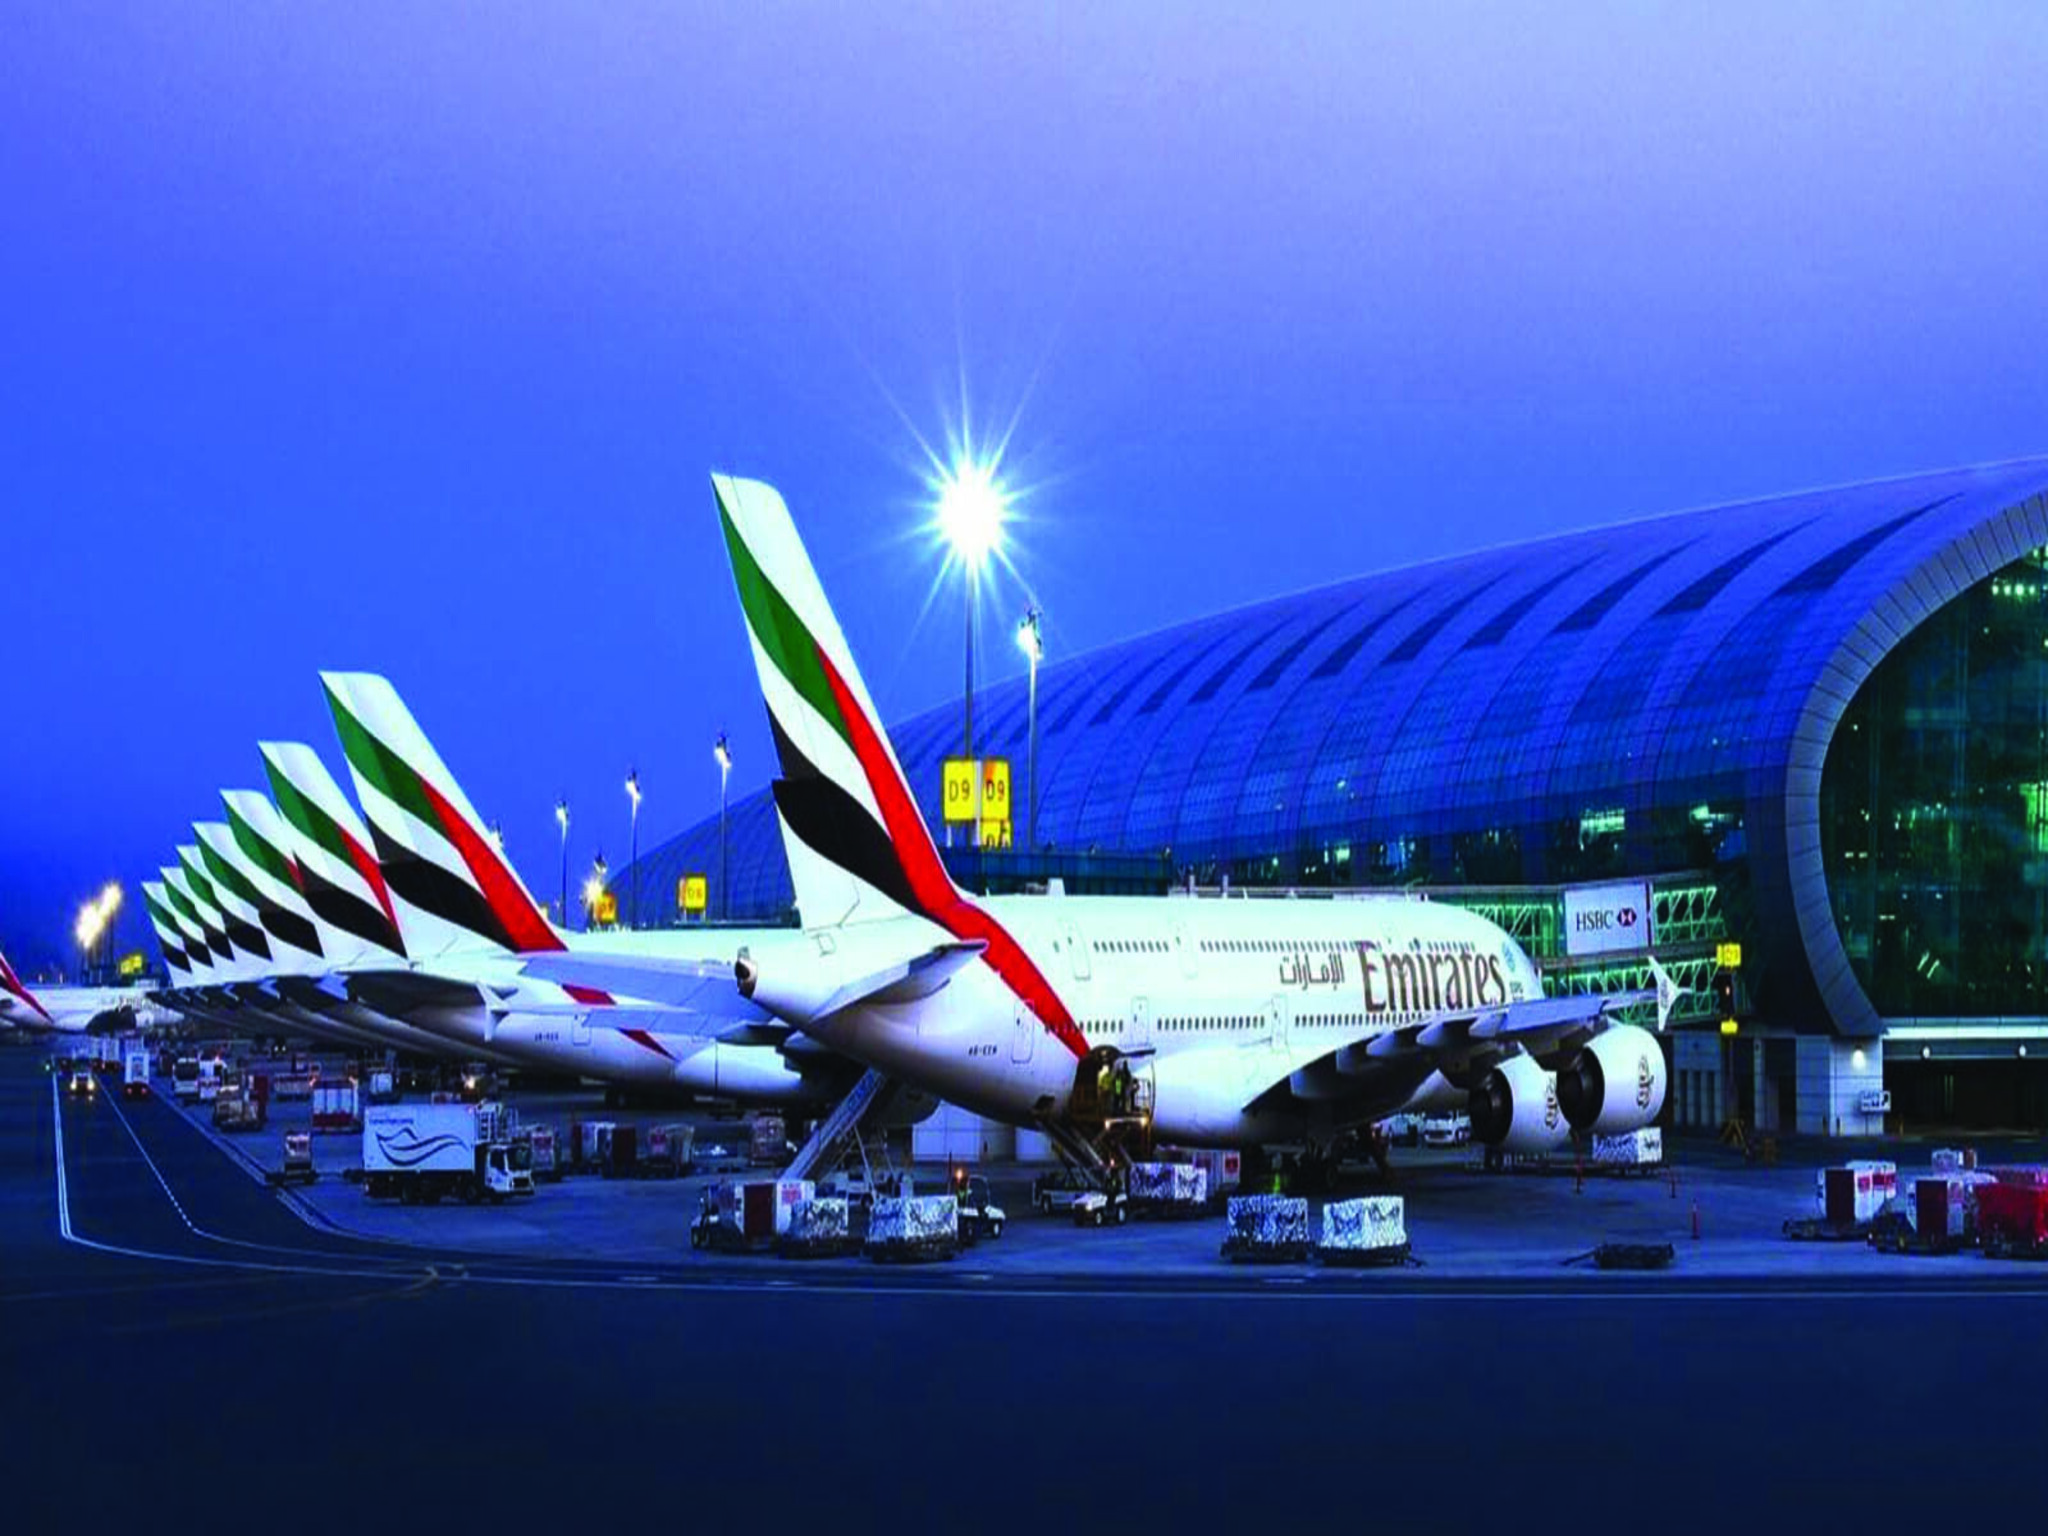 UAE airports advise travelers not to arrive early